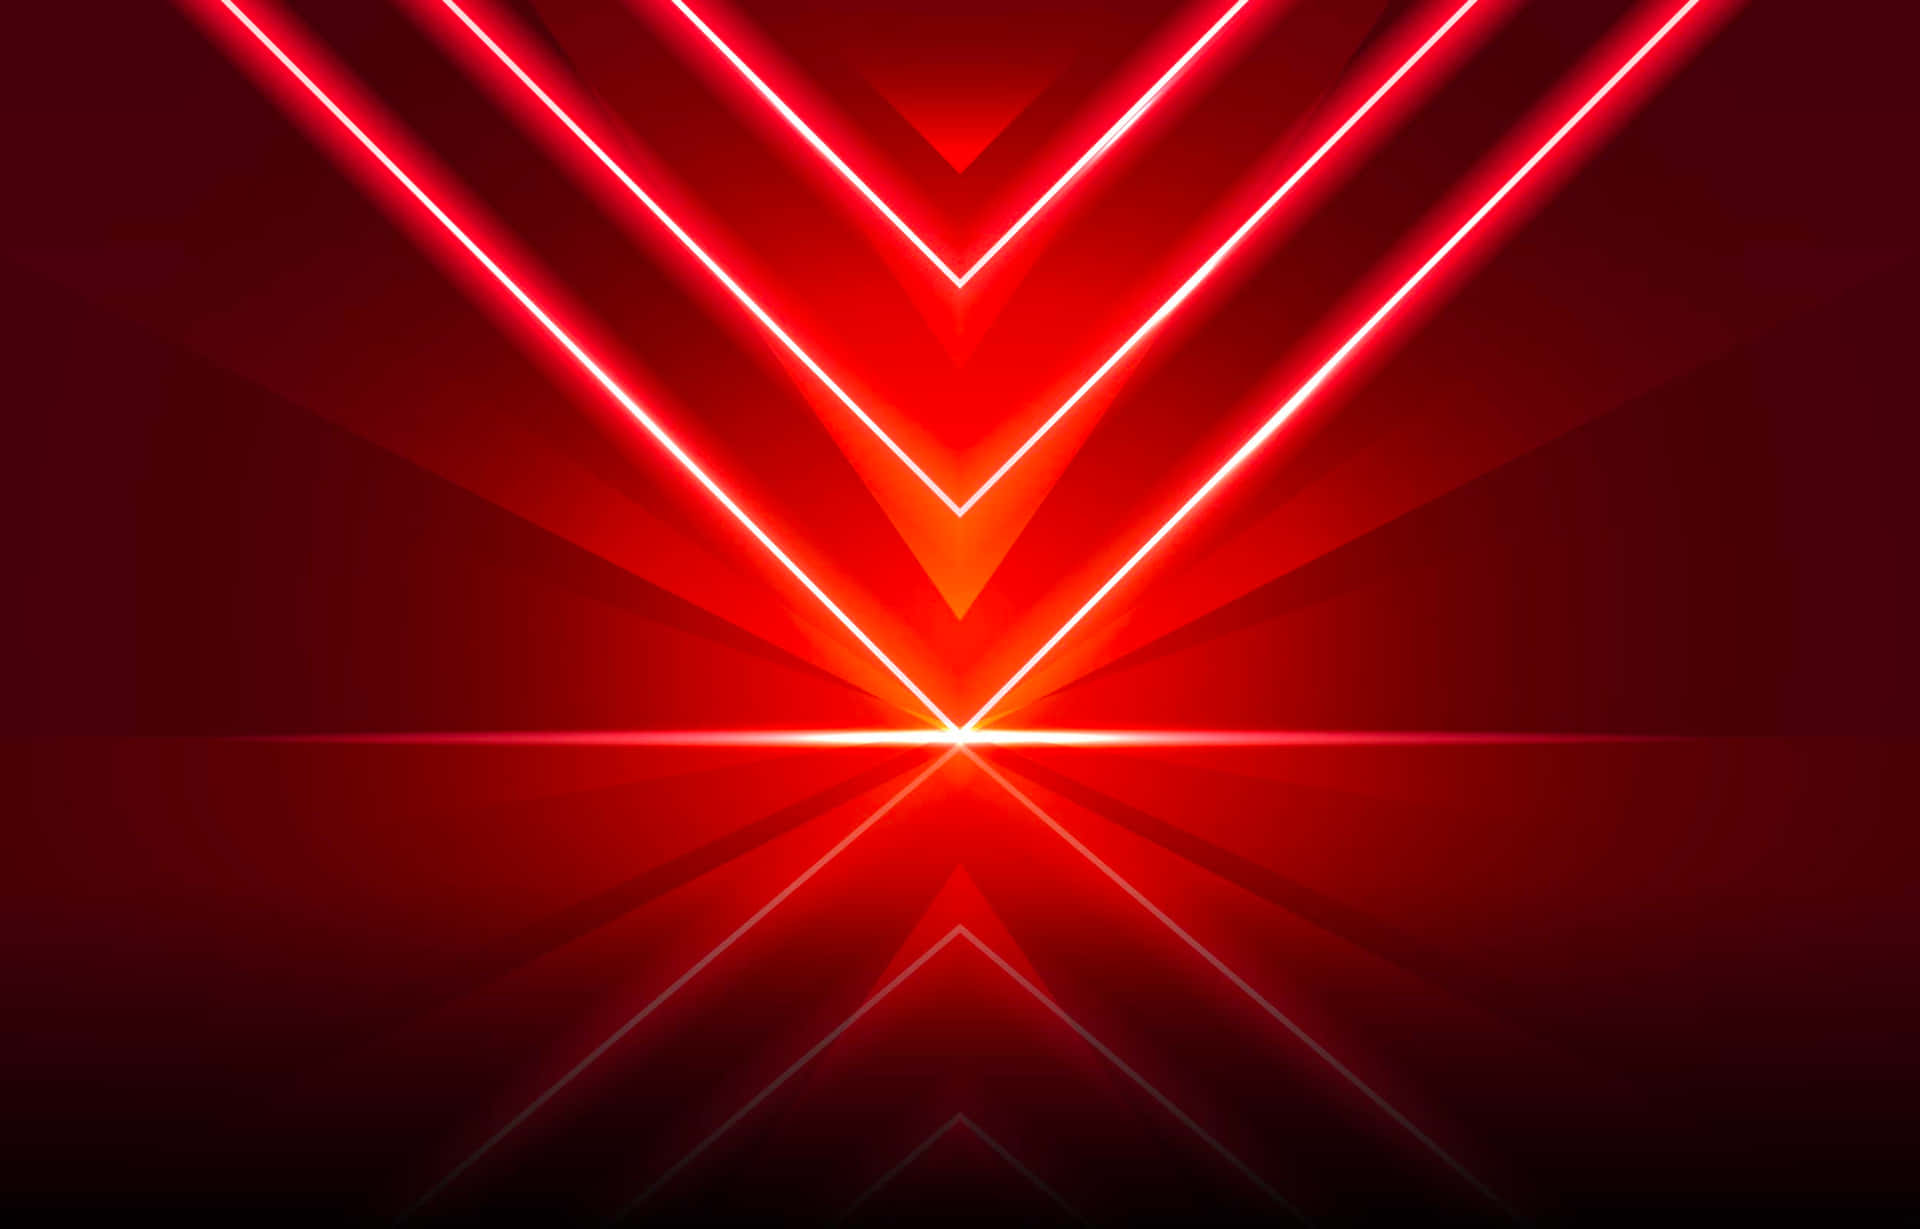 An electrifying Neon Red background for the bold and expressive